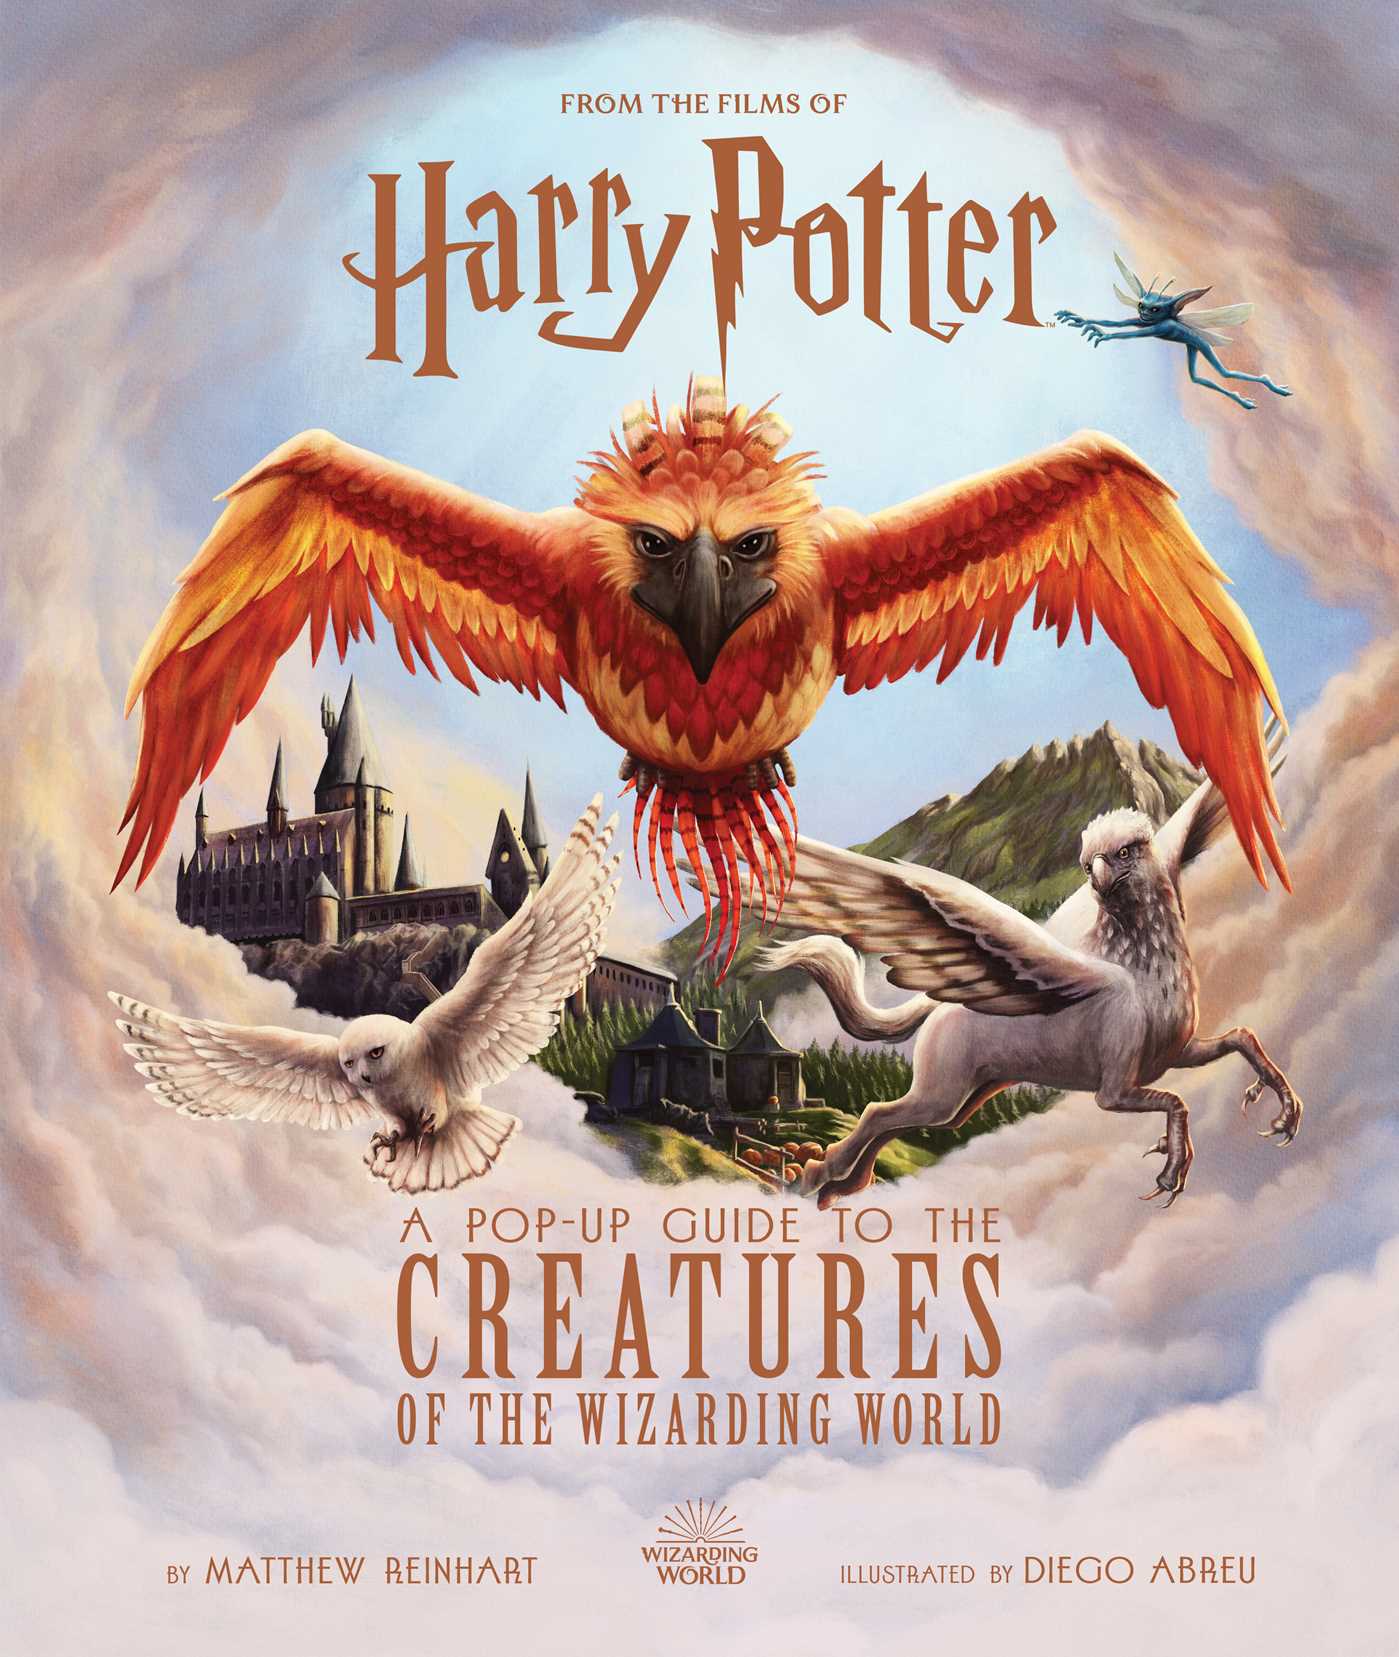 The Magical Creatures: Enchanting Beings of the Wizarding World 2